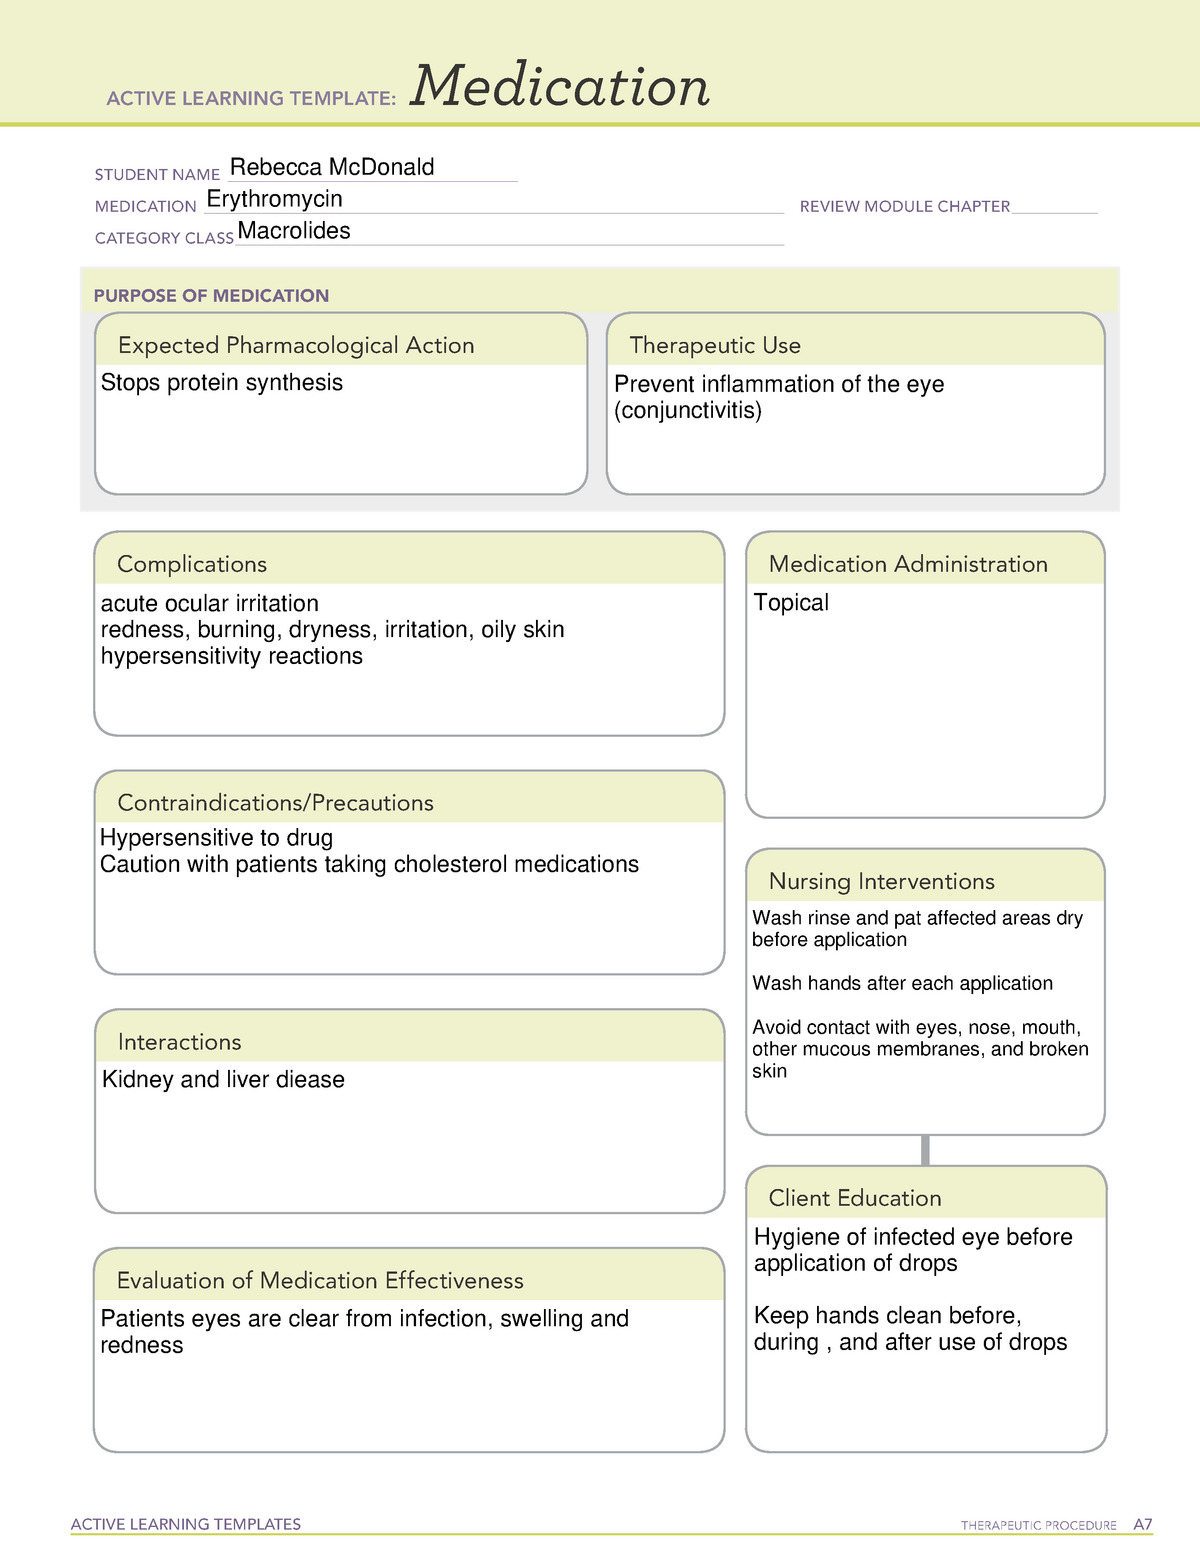 Erythromycin Med Card ACTIVE LEARNING TEMPLATES THERAPEUTIC PROCEDURE